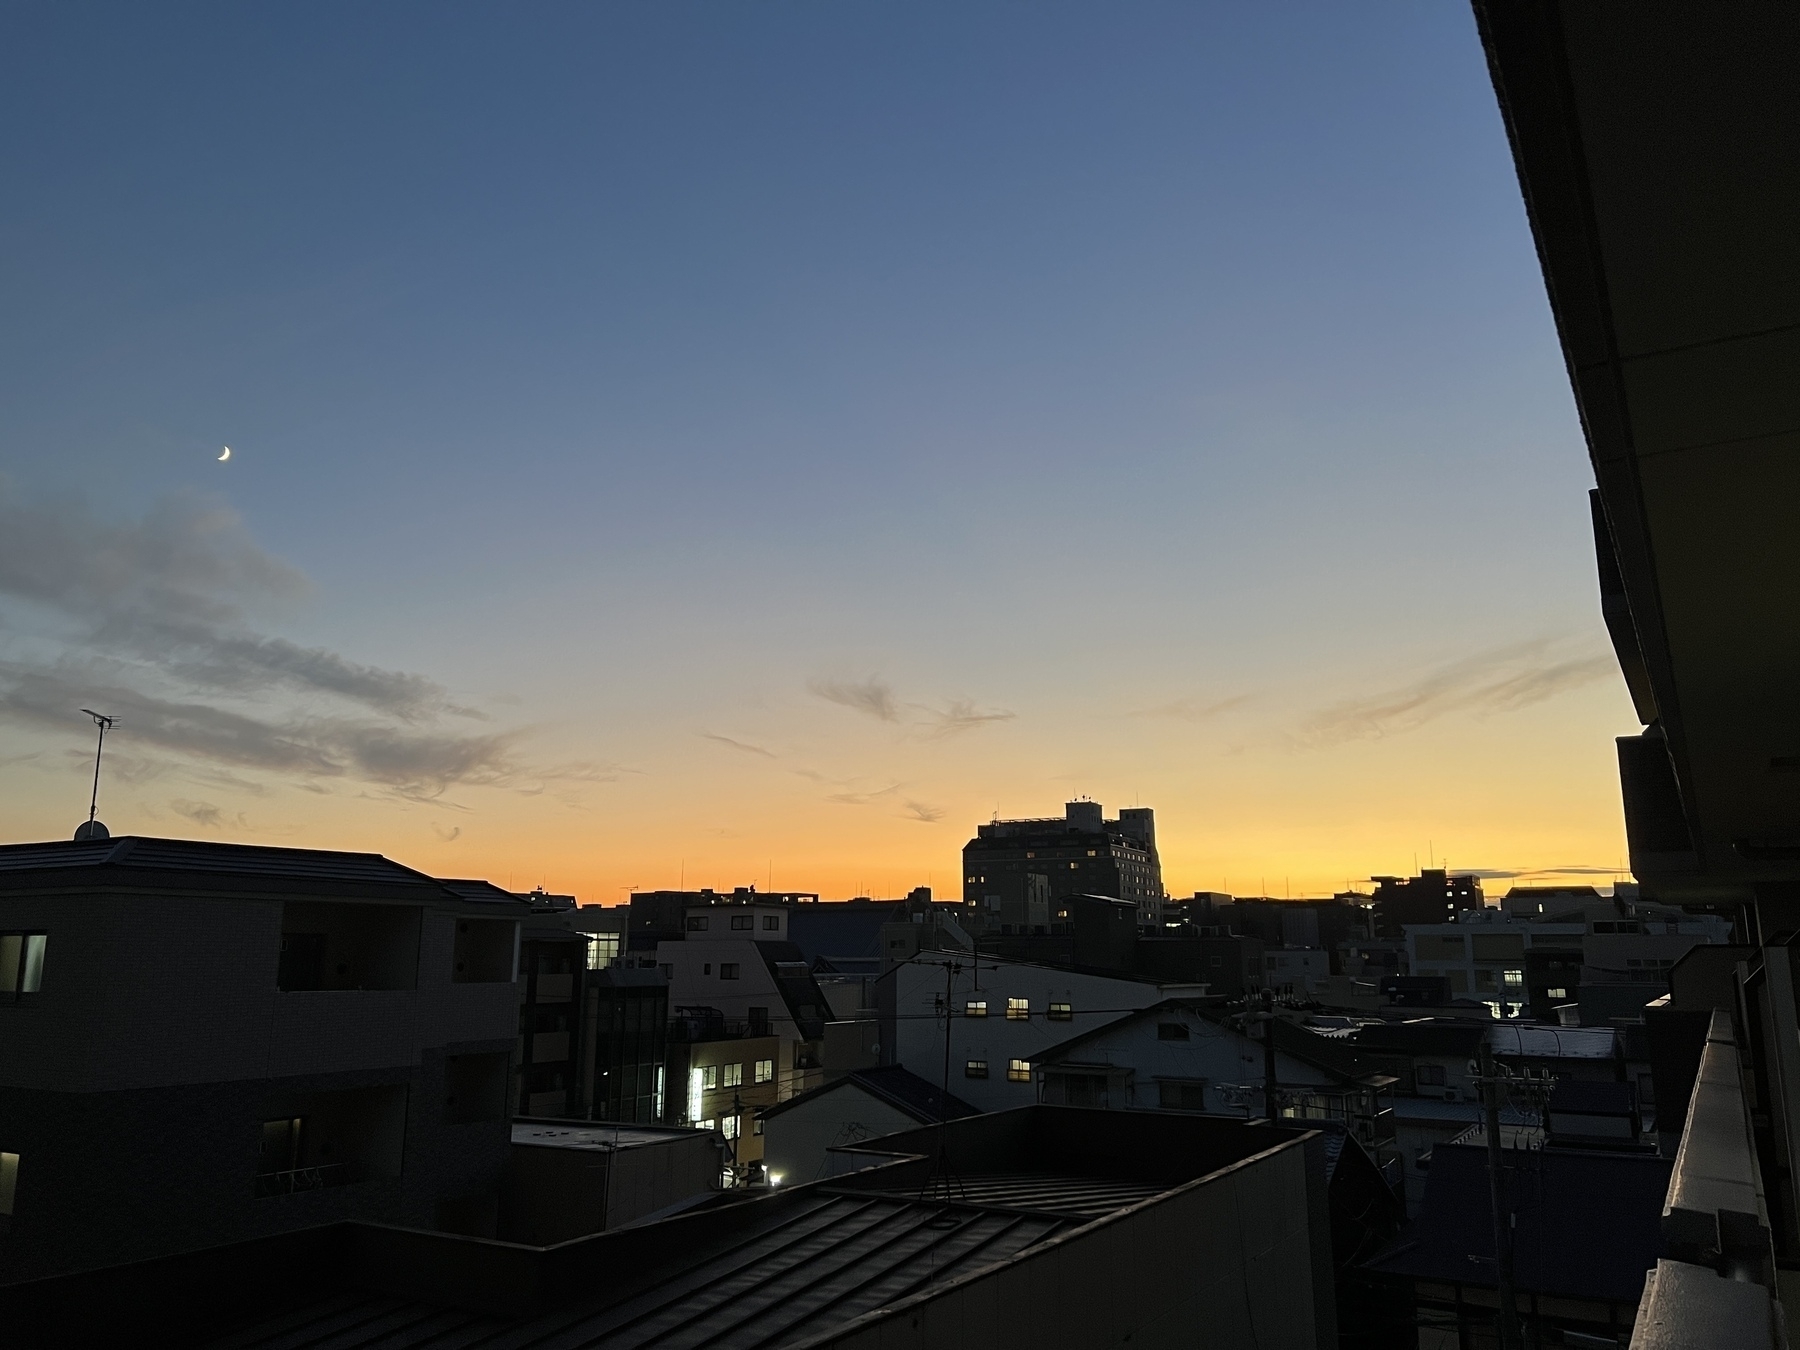 Sunset from a mid rise building balcony. A crescent moon is crisply visible in the sky